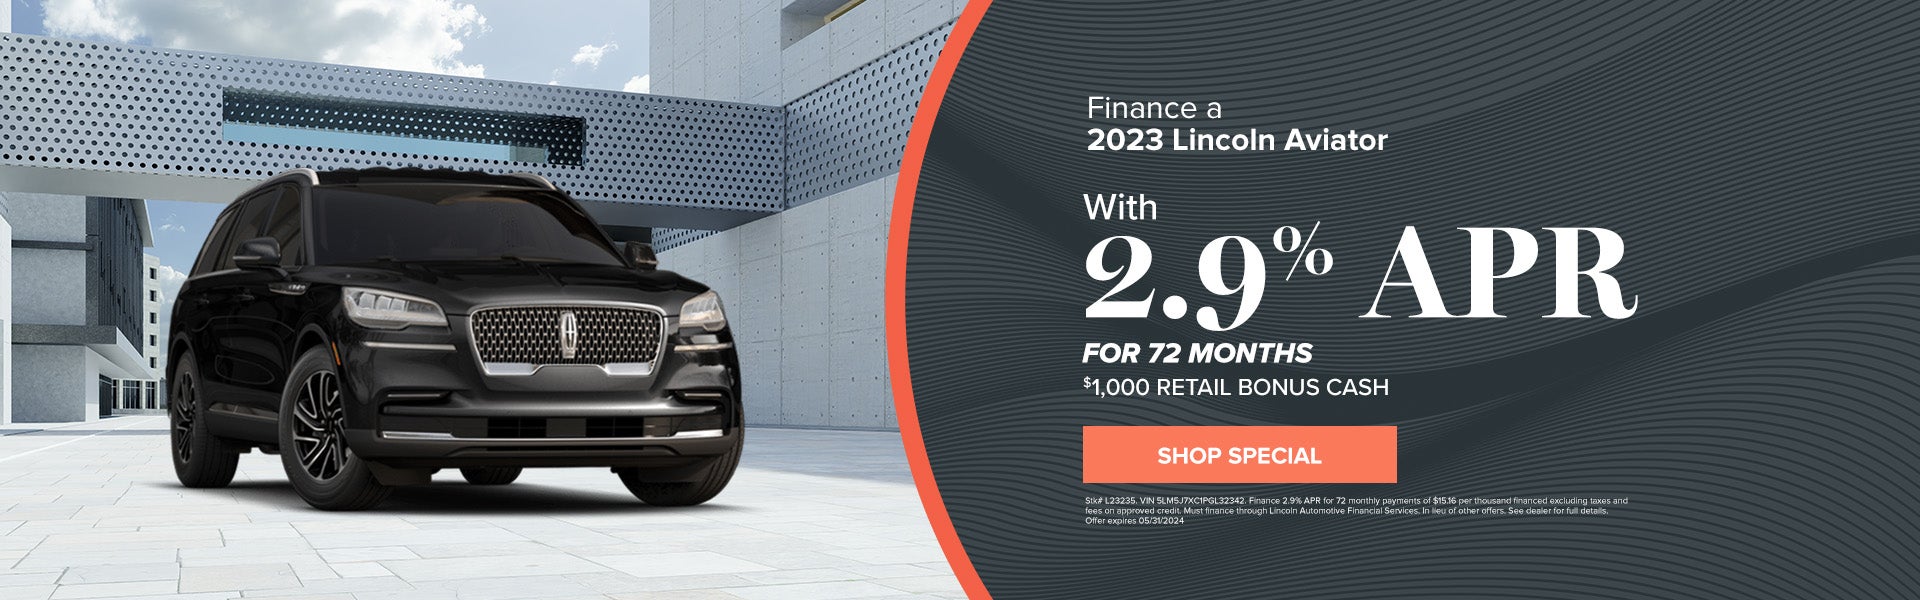 Finance a 2023 Lincoln Aviator with 2.9% APR for 72 Months